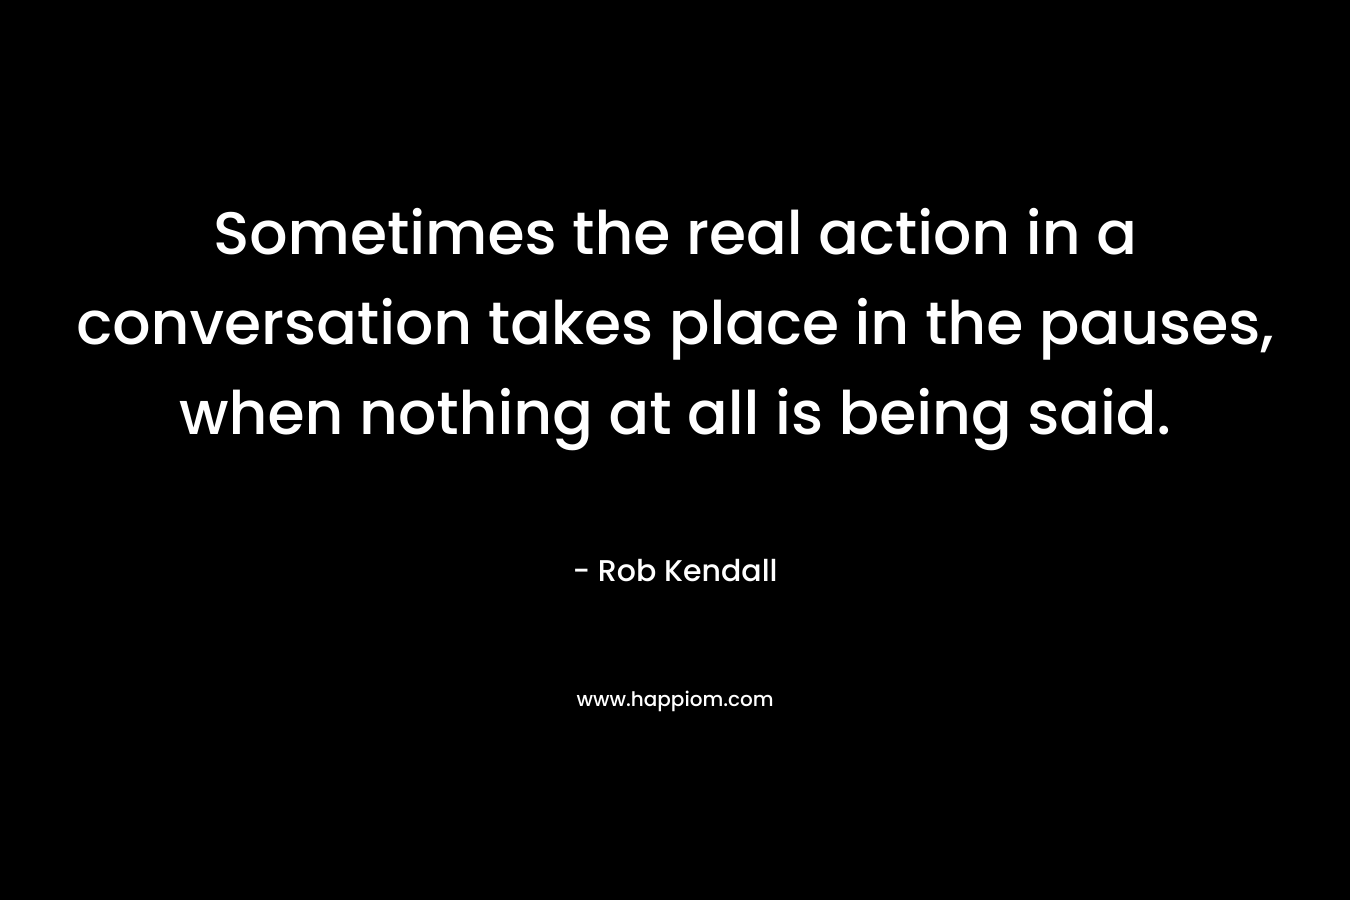 Sometimes the real action in a conversation takes place in the pauses, when nothing at all is being said.